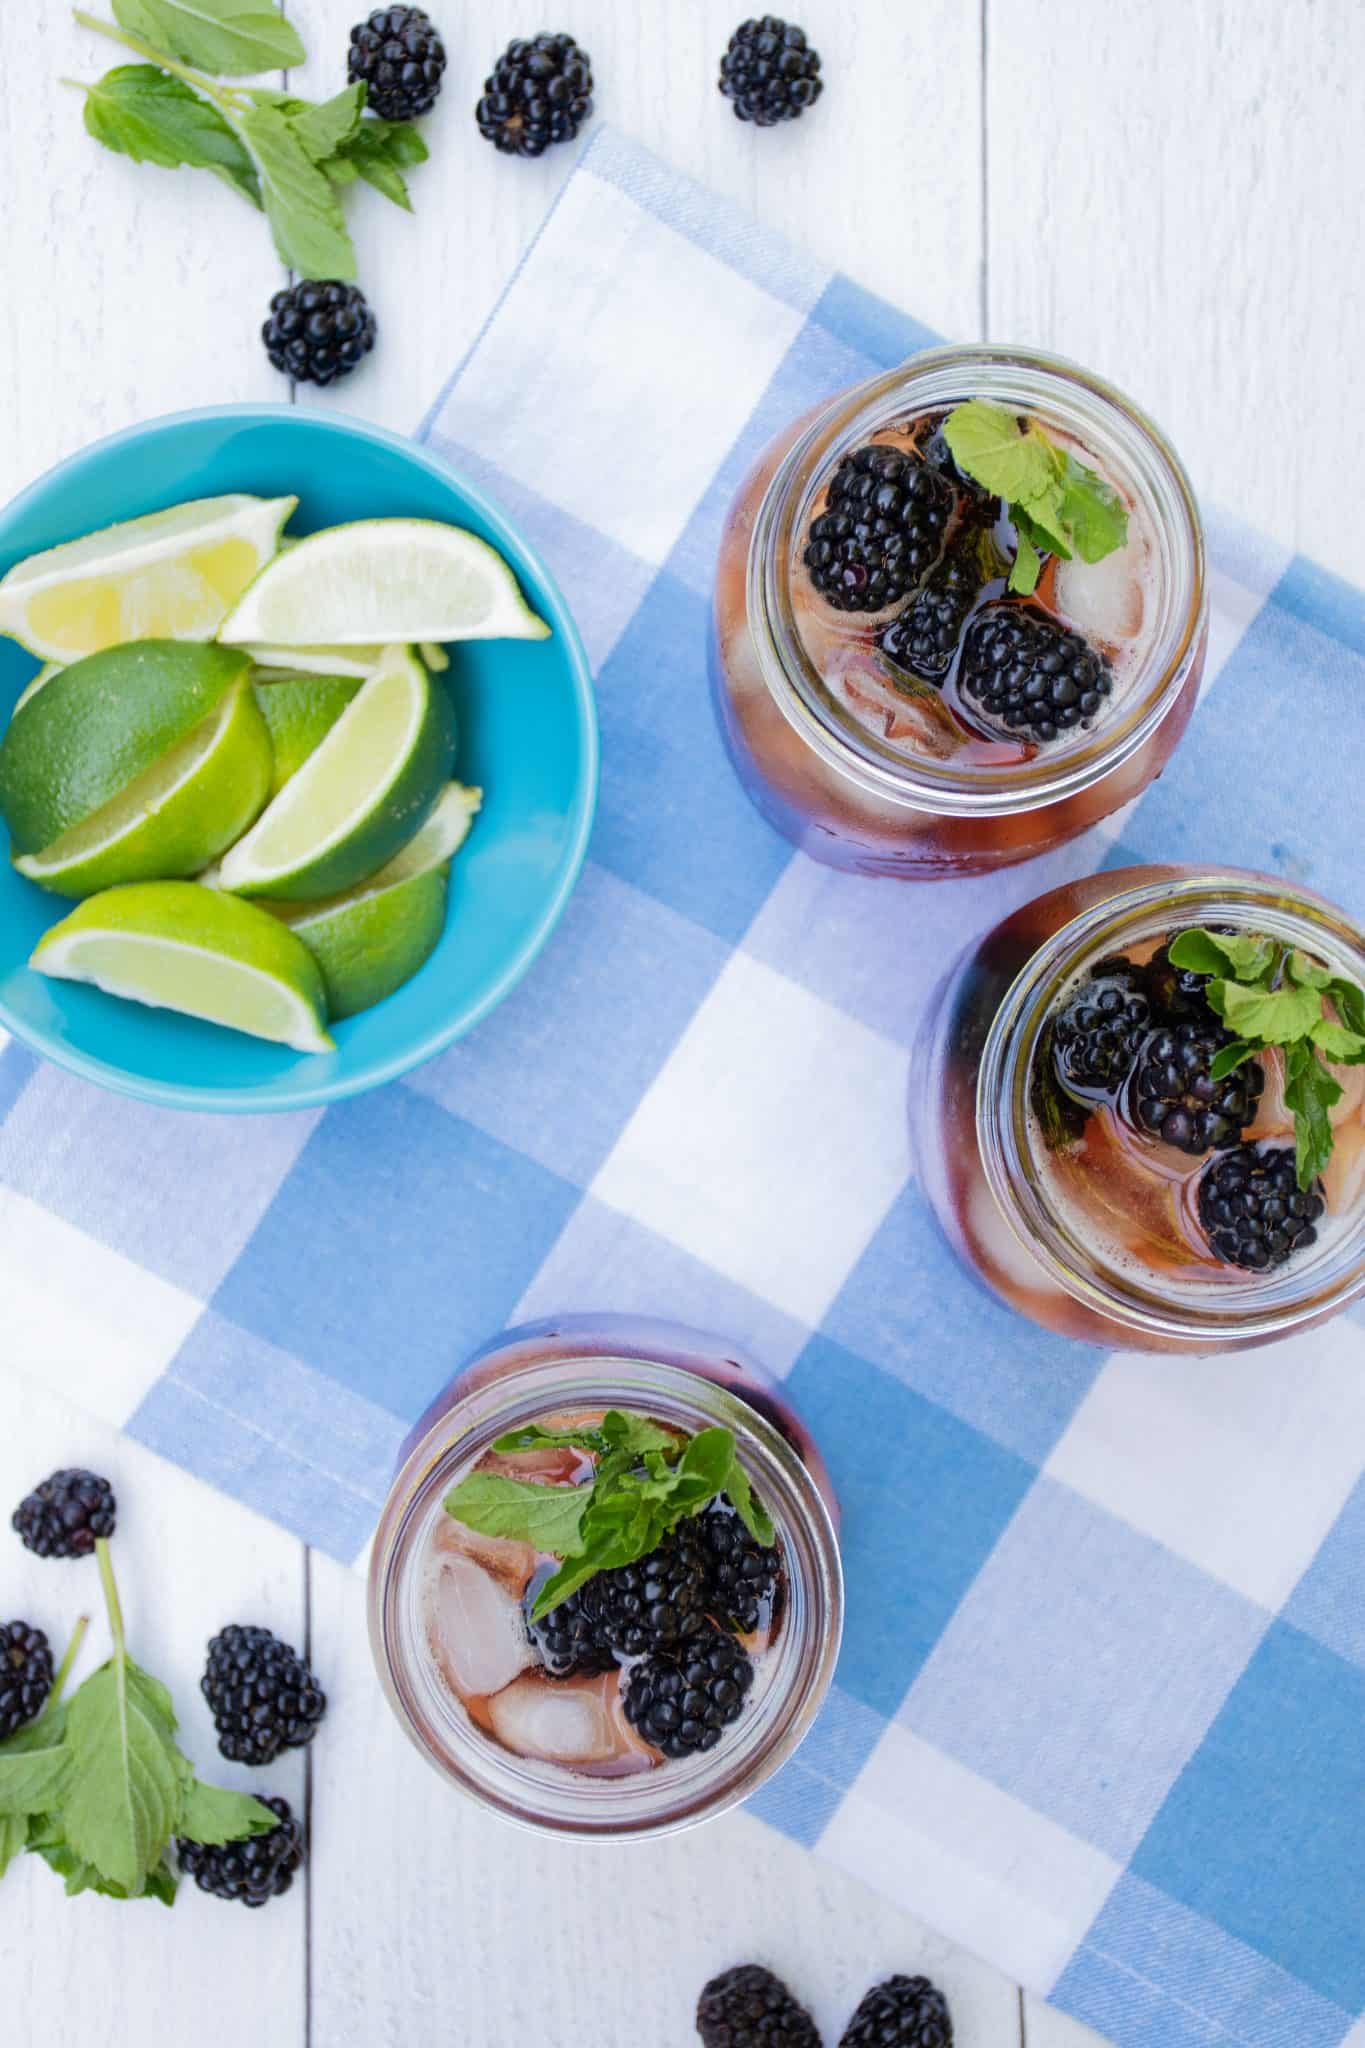 Overhead shot of iced tea in 3 Mason jars, with ice, blackberries, and mint. Small bowl of lime slices to the side.